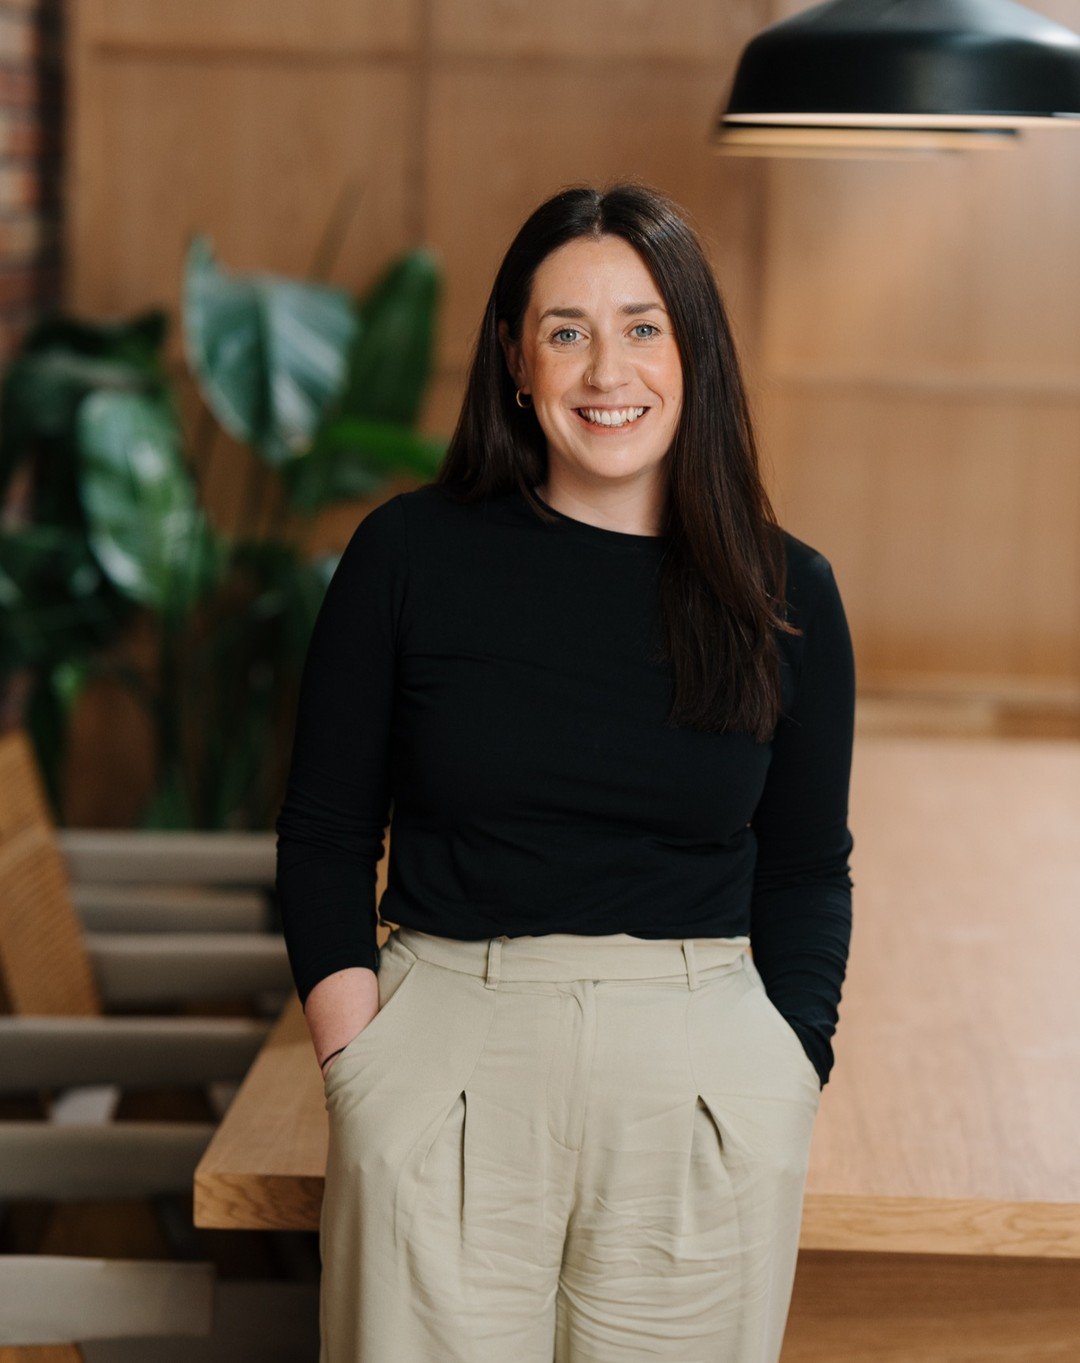 Meet Lauren Evans, our new Senior Interior Designer joining the Belfast office.

Passionate about considered and thoughtful design, with a keen eye for detail, Lauren works closely with our clients from the early masterplanning stages through to fini